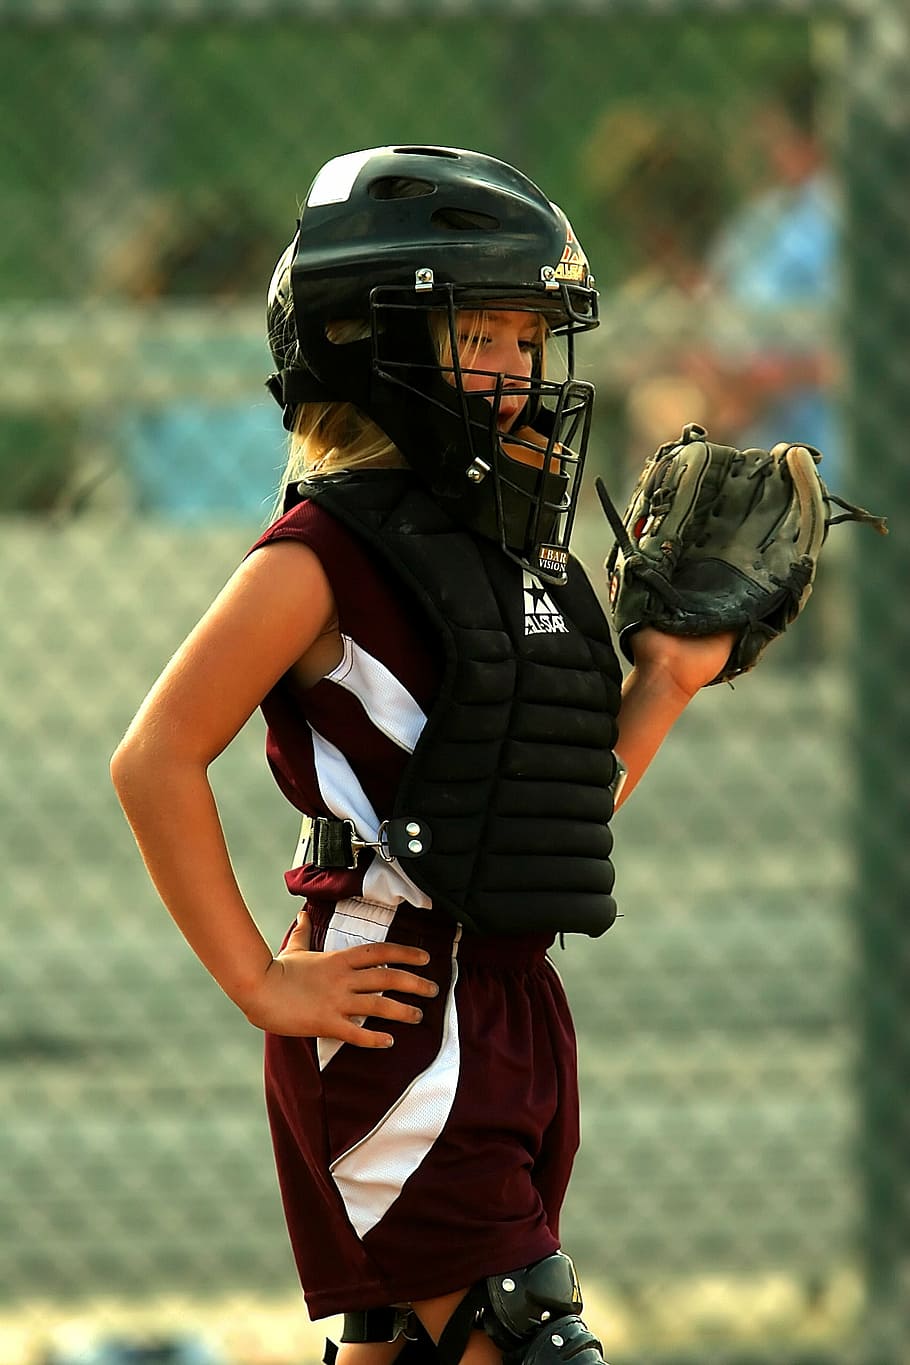 HD wallpaper: softball, player, catcher, girl, female, game, competition |  Wallpaper Flare